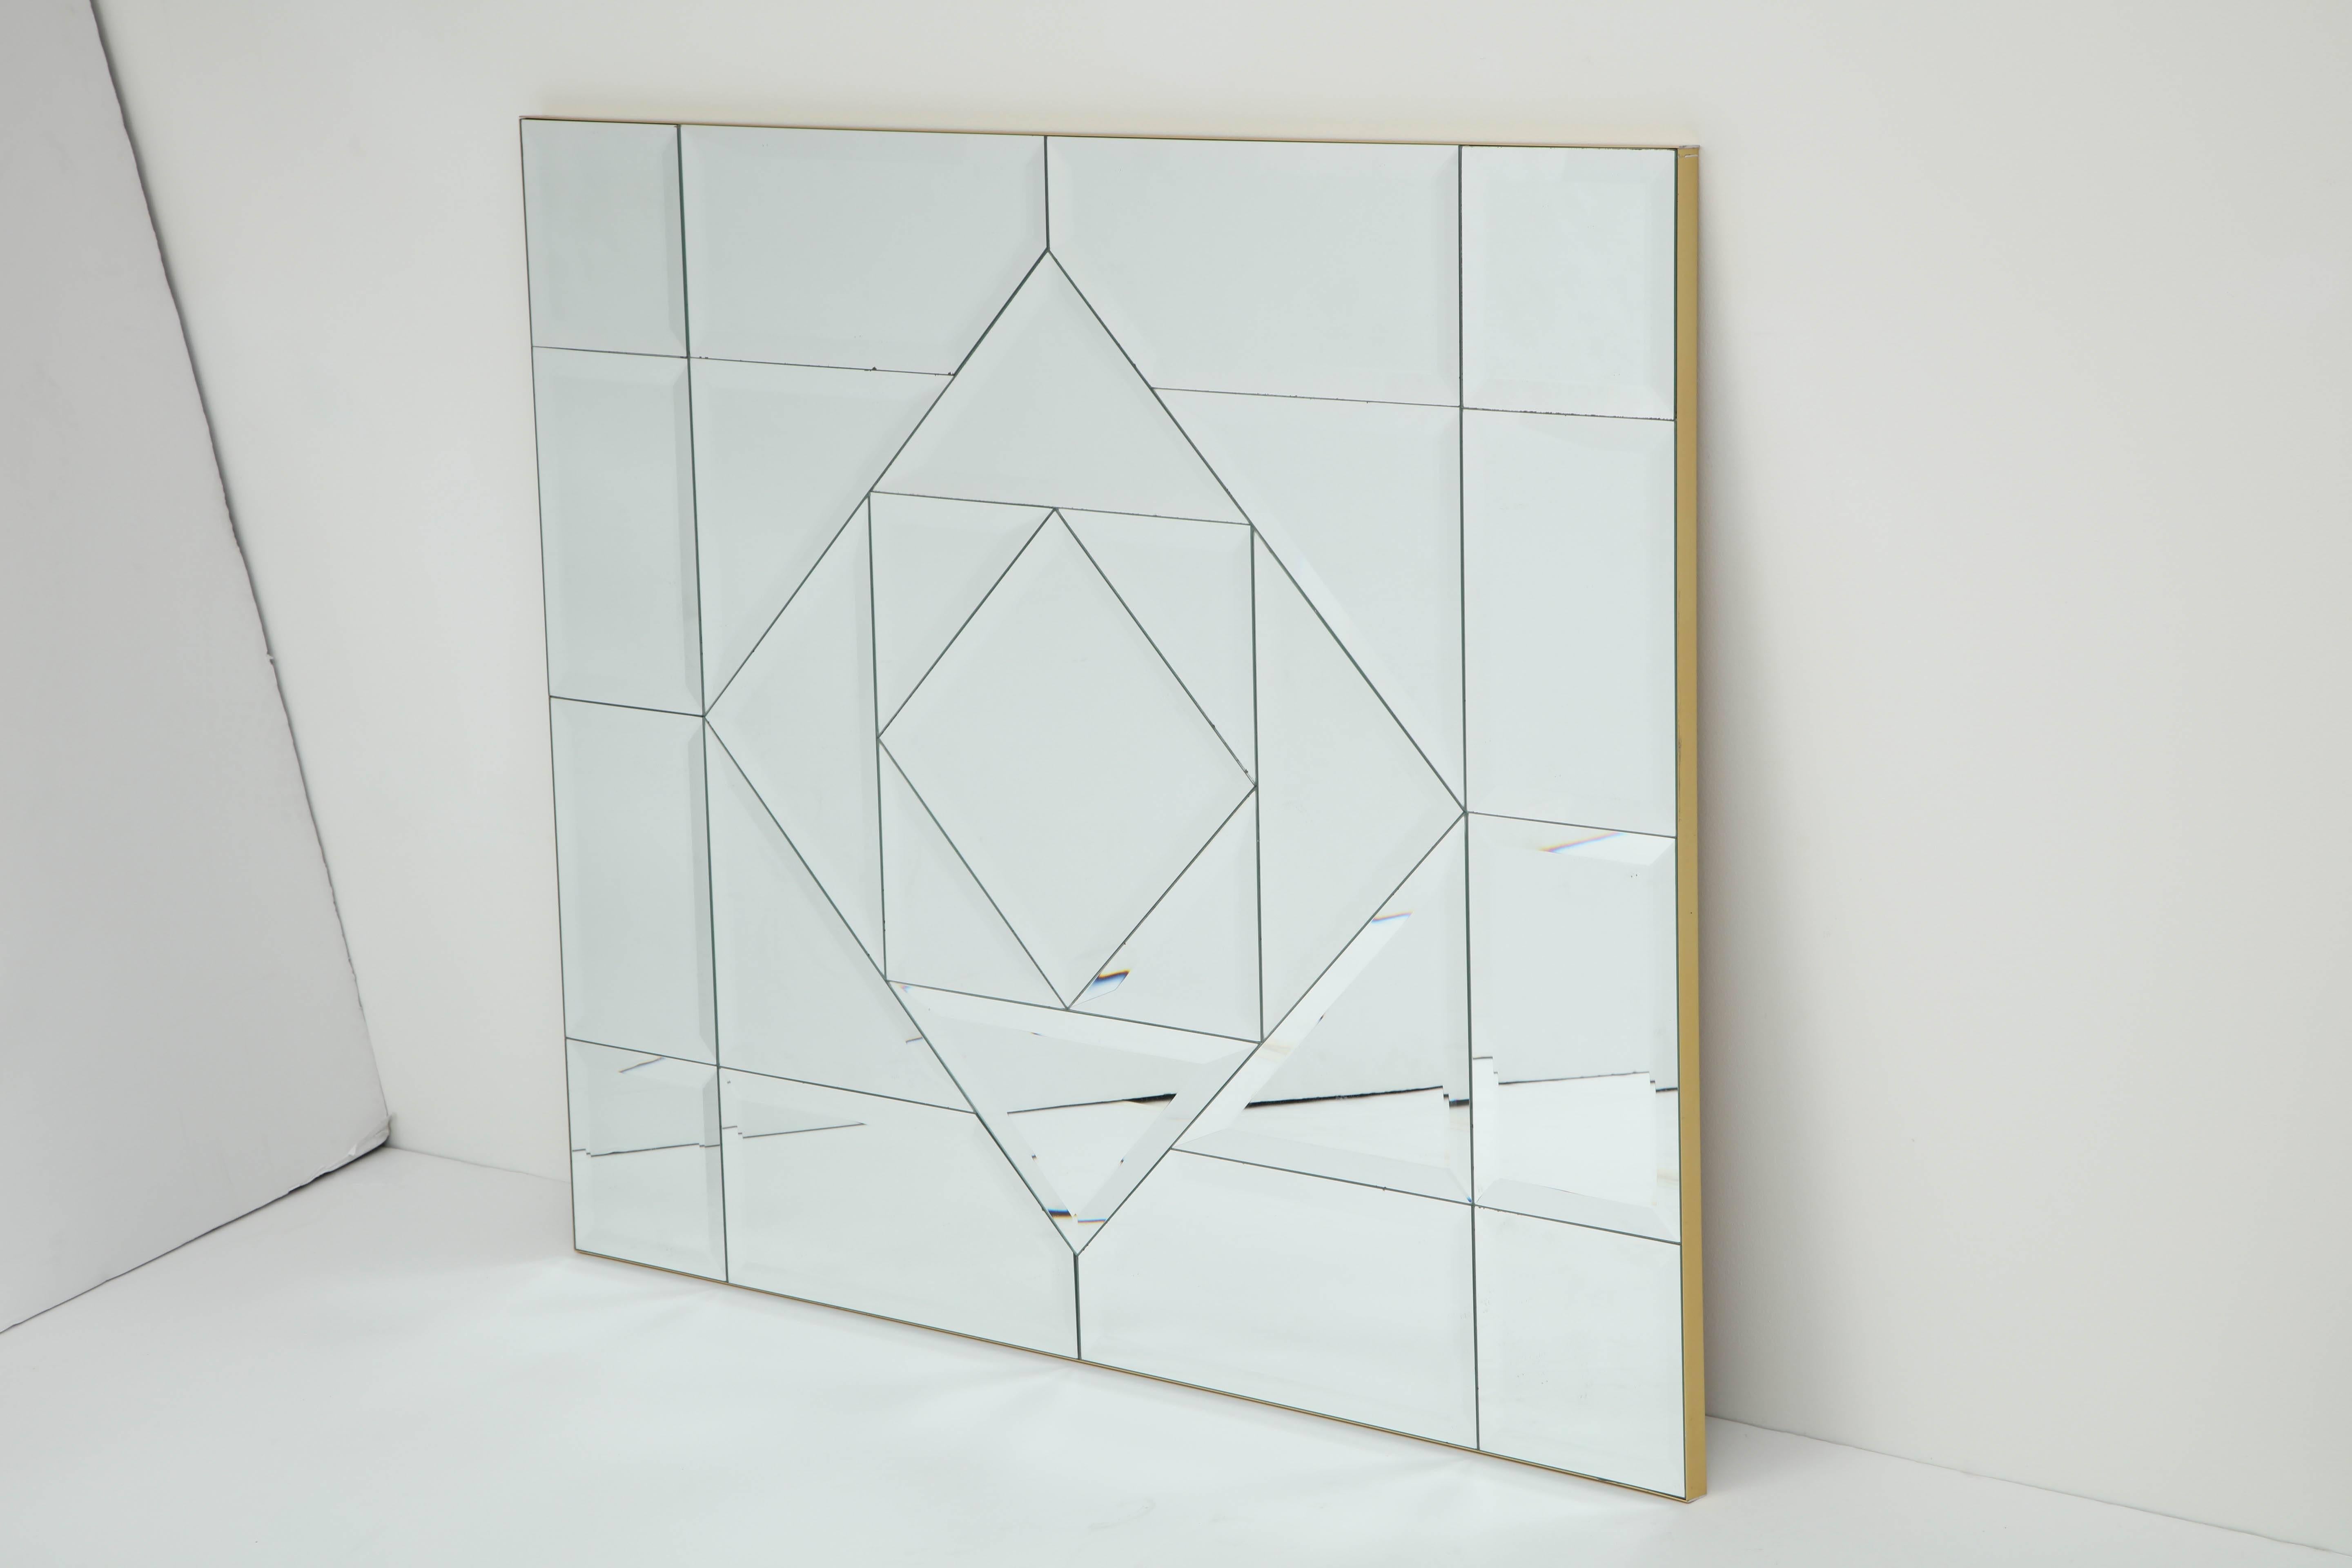 This Fabulous large designed mirror has been beautifully executed with bevelled and faceted edges and has been framed in a satin brass frame.
The mirror comes complete with a hanging cleat and it can be hung horizontally or vertically.
There is a